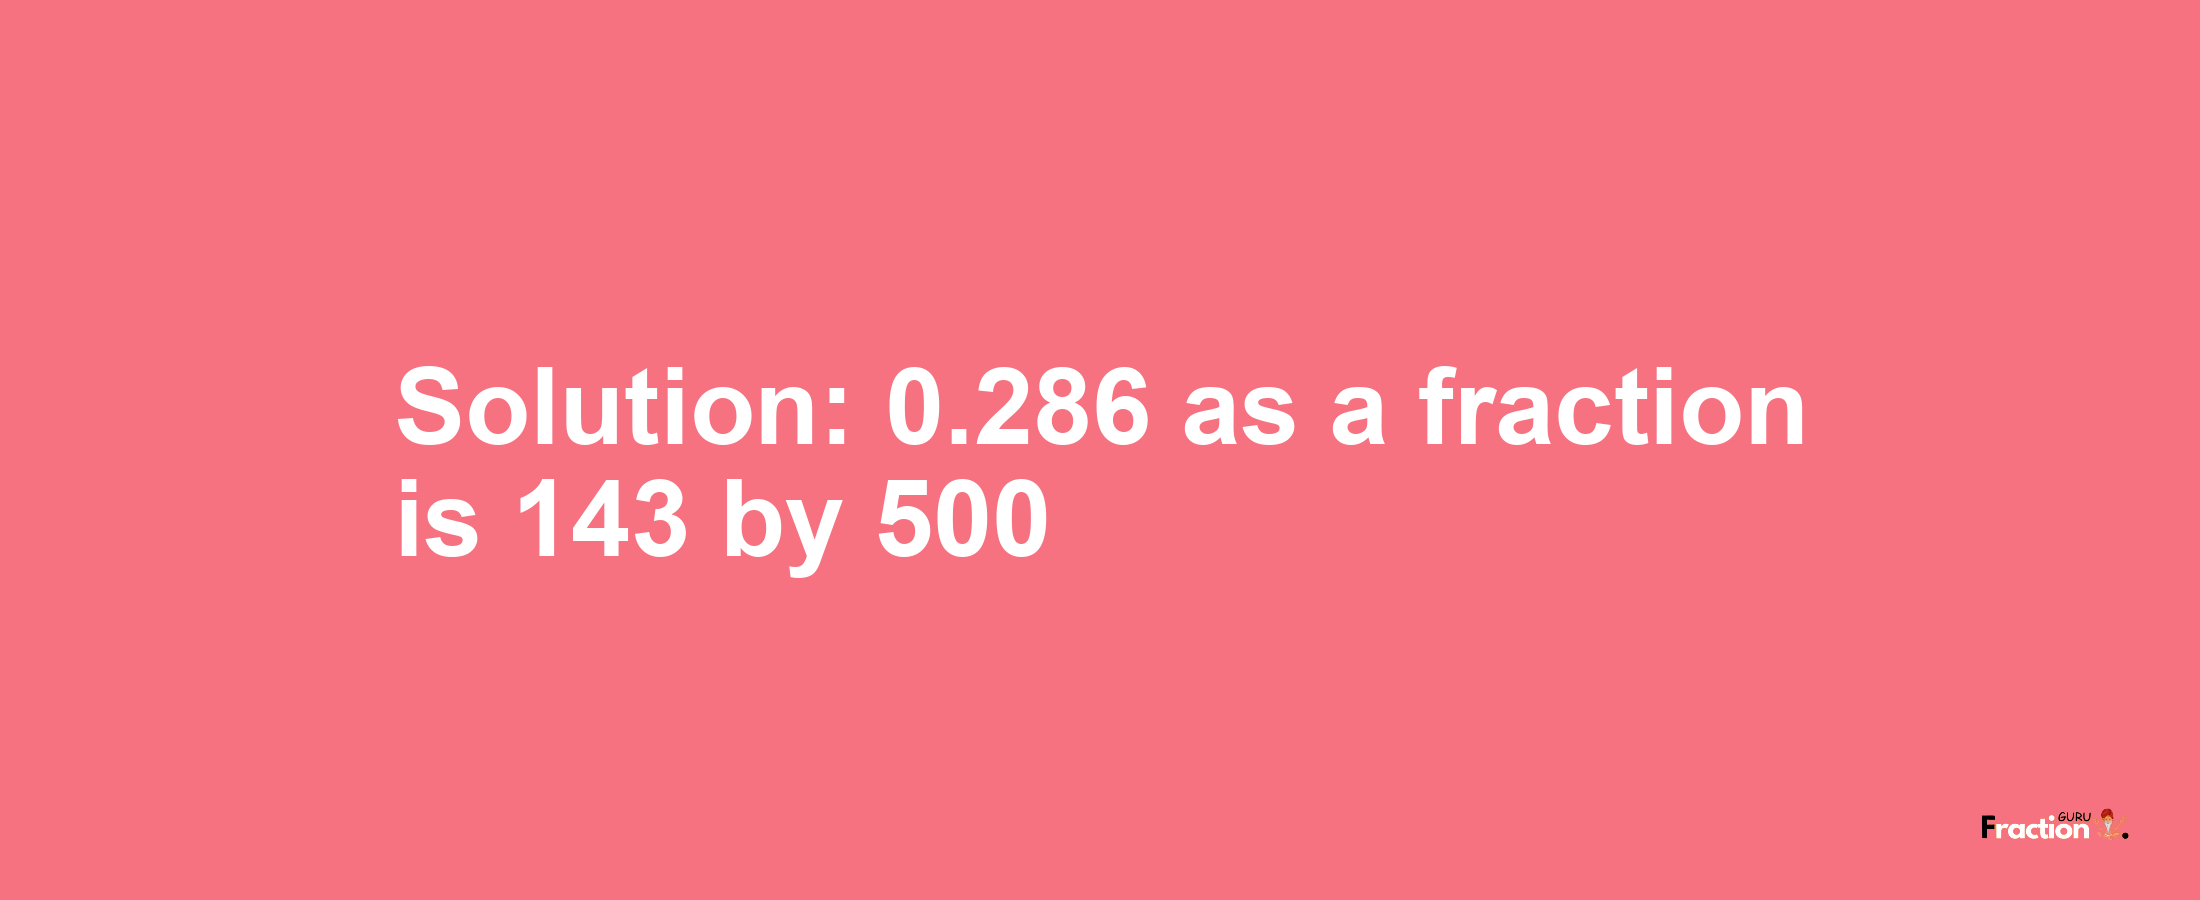 Solution:0.286 as a fraction is 143/500